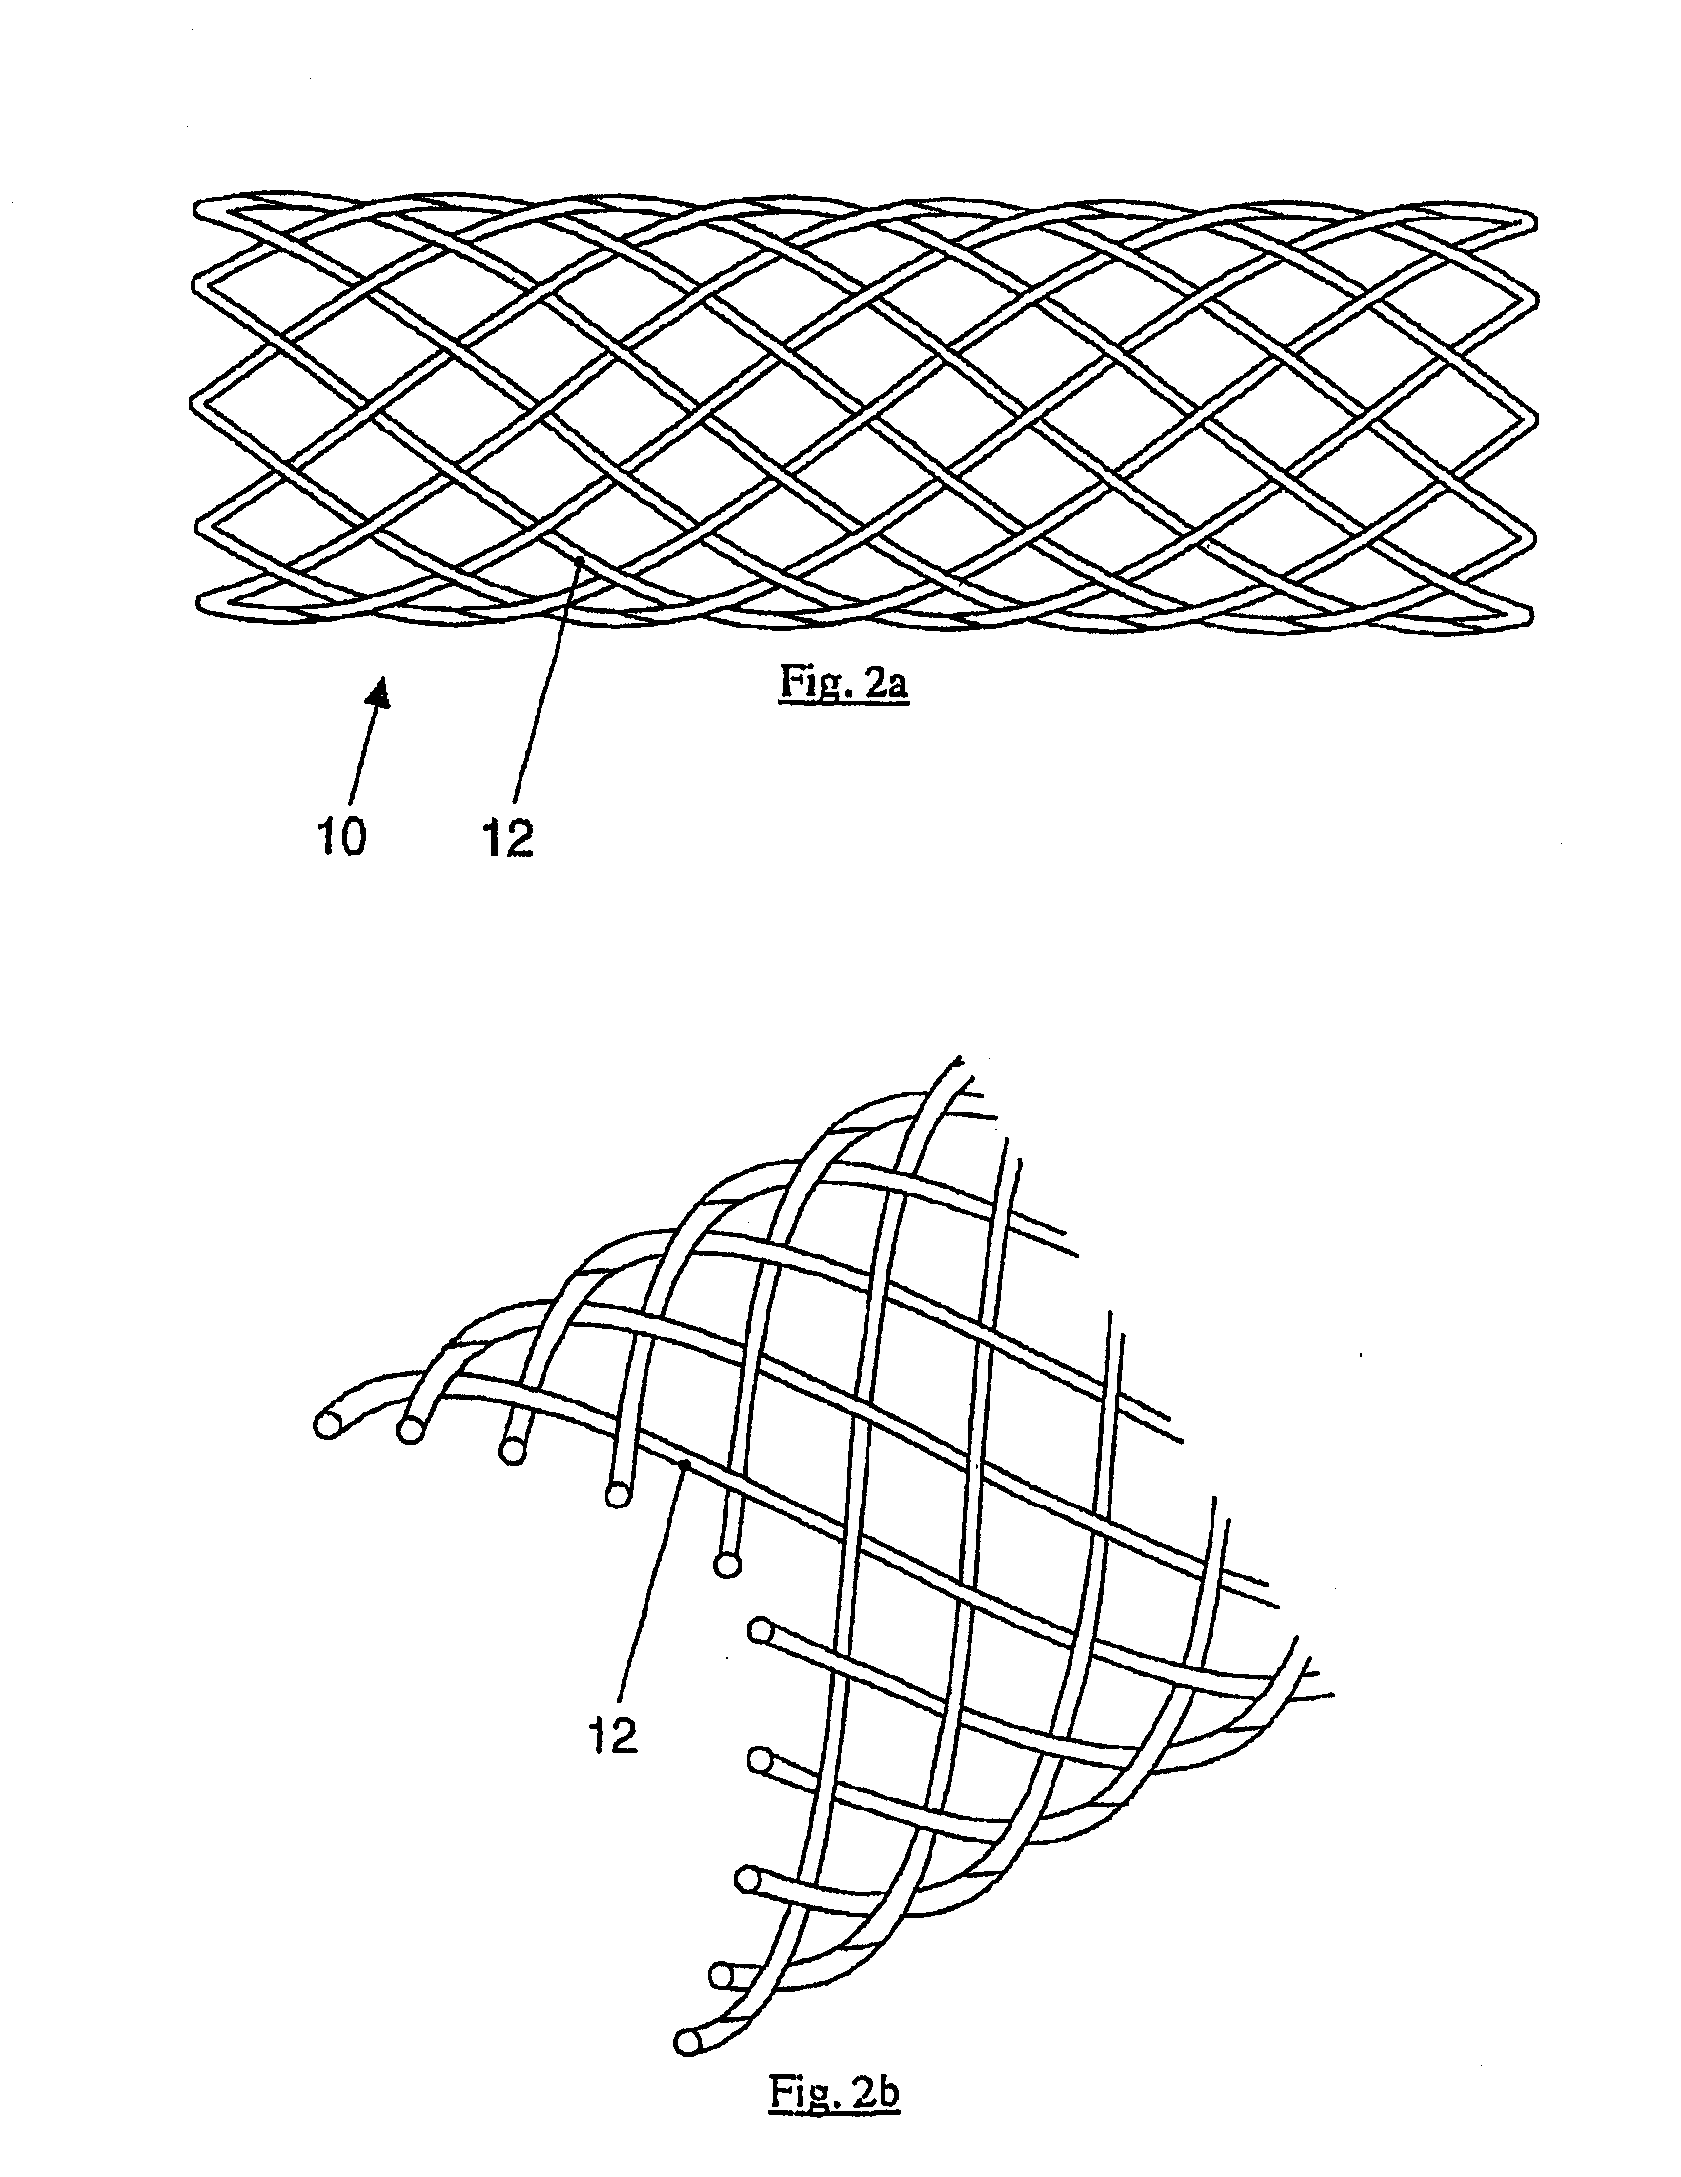 Absorbable Medical Implant Made of Fiber-Reinforced Magnesium or Fiber-Reinforced Magnesium Alloys